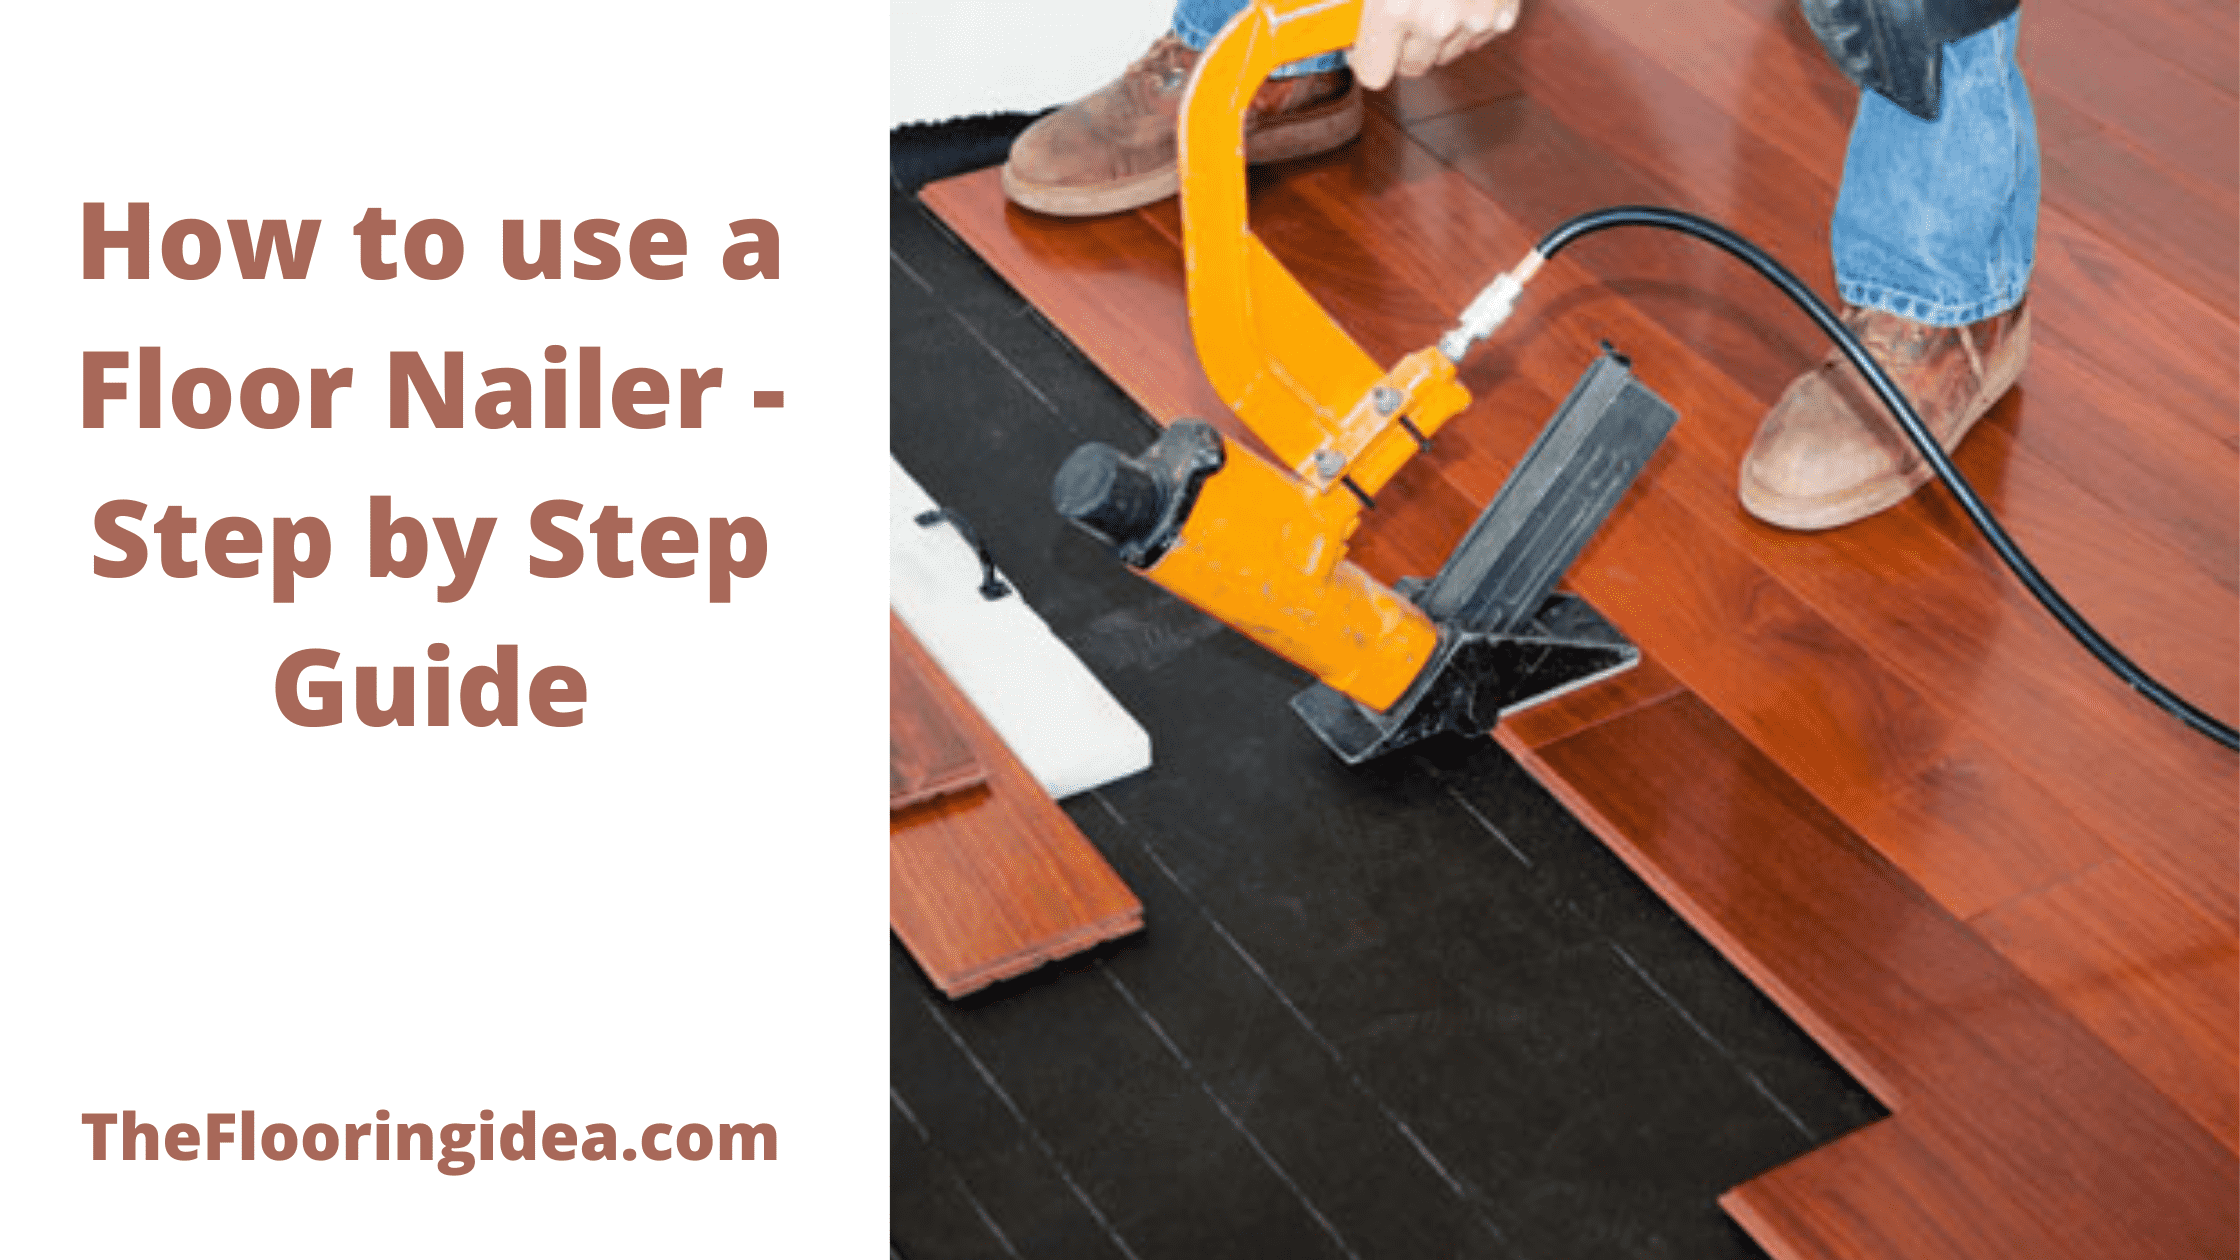 How To Use A Floor Nailer In 7 Easy Steps, What Type Of Nailer For Engineered Hardwood Floors